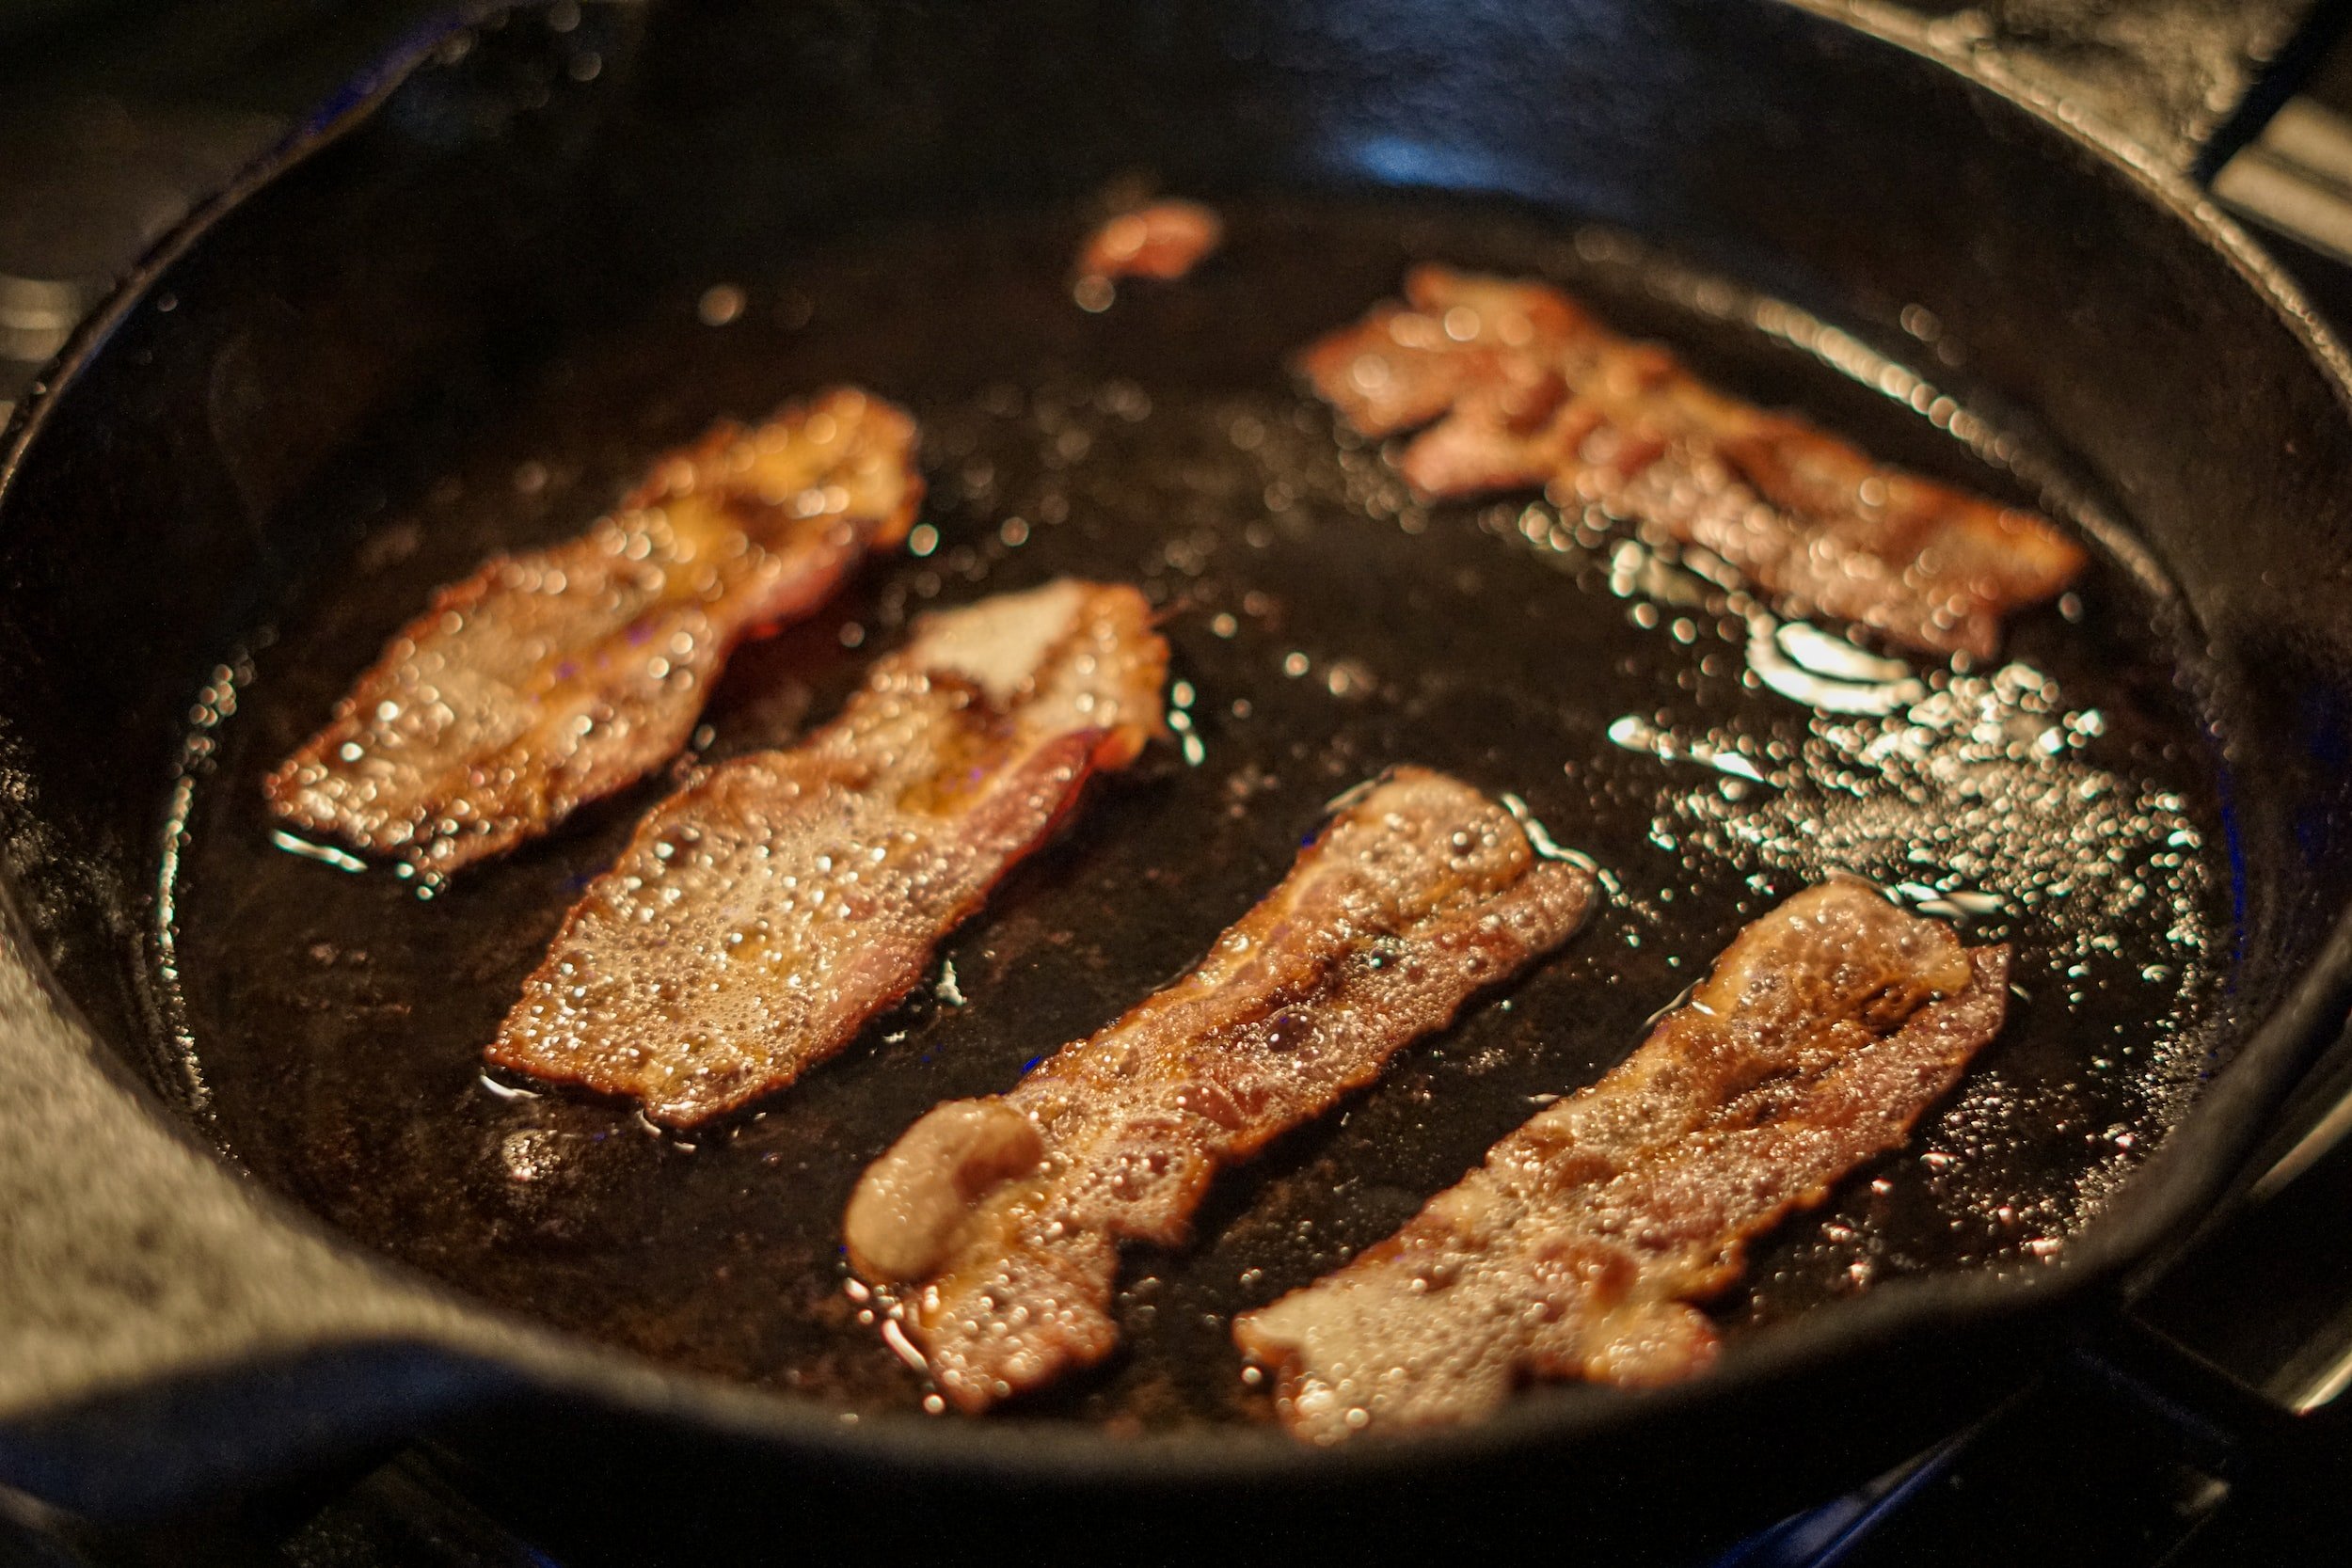 Storing And Caring For Your Cast Iron Skillet